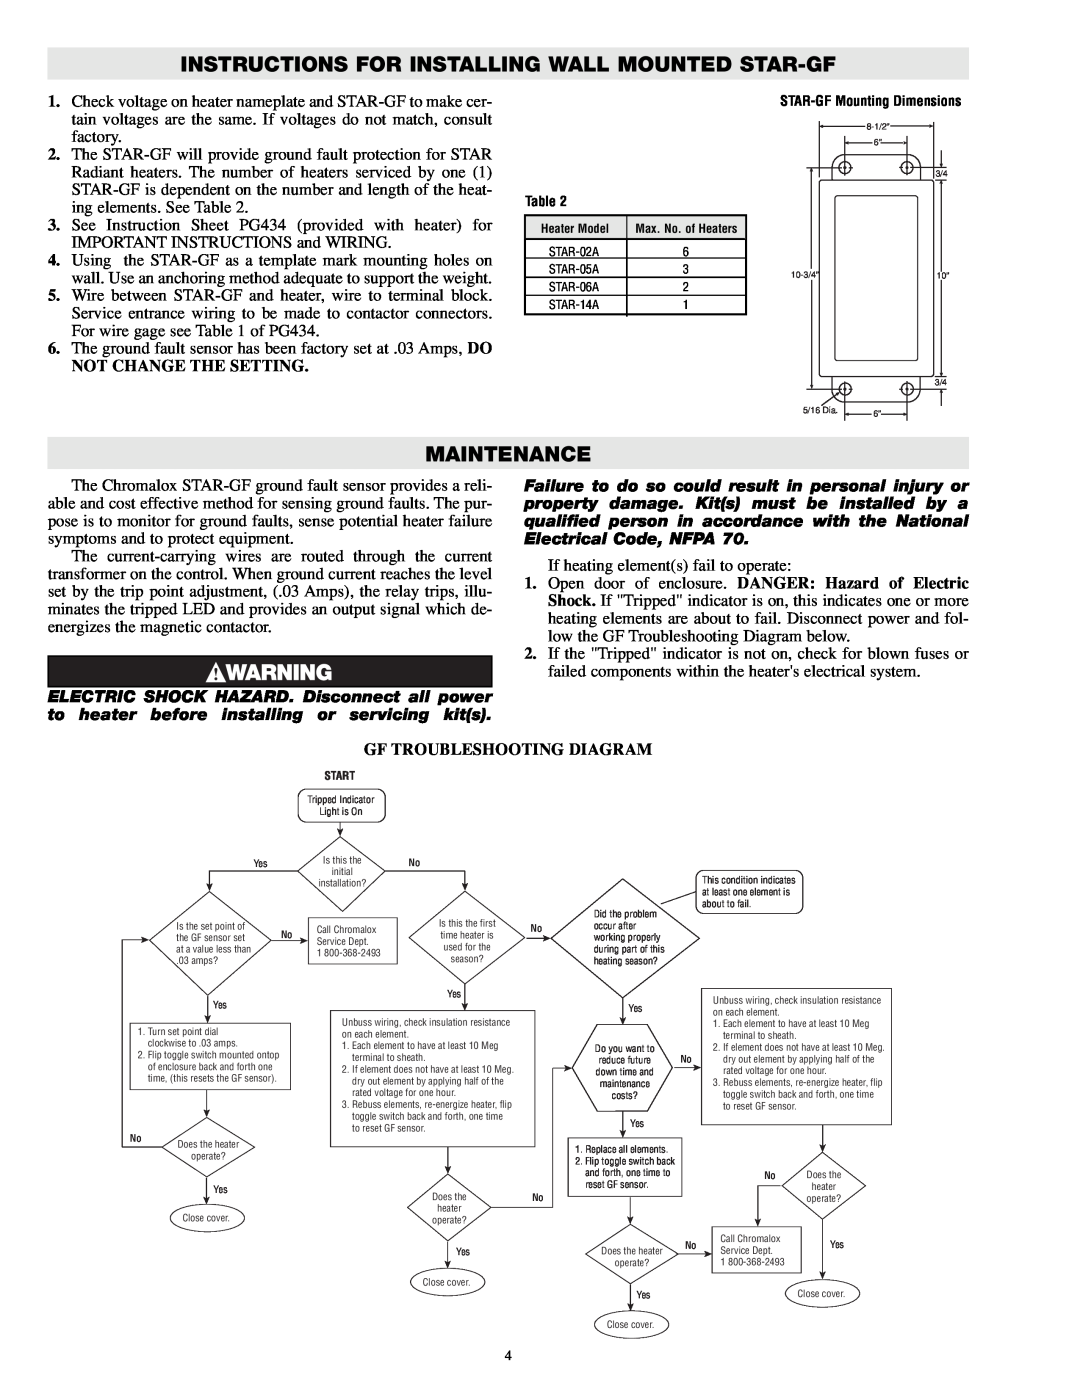 Chromalox DS-50600 Instructions For Installing Wall Mounted Star-Gf, Maintenance, Not Change The Setting 